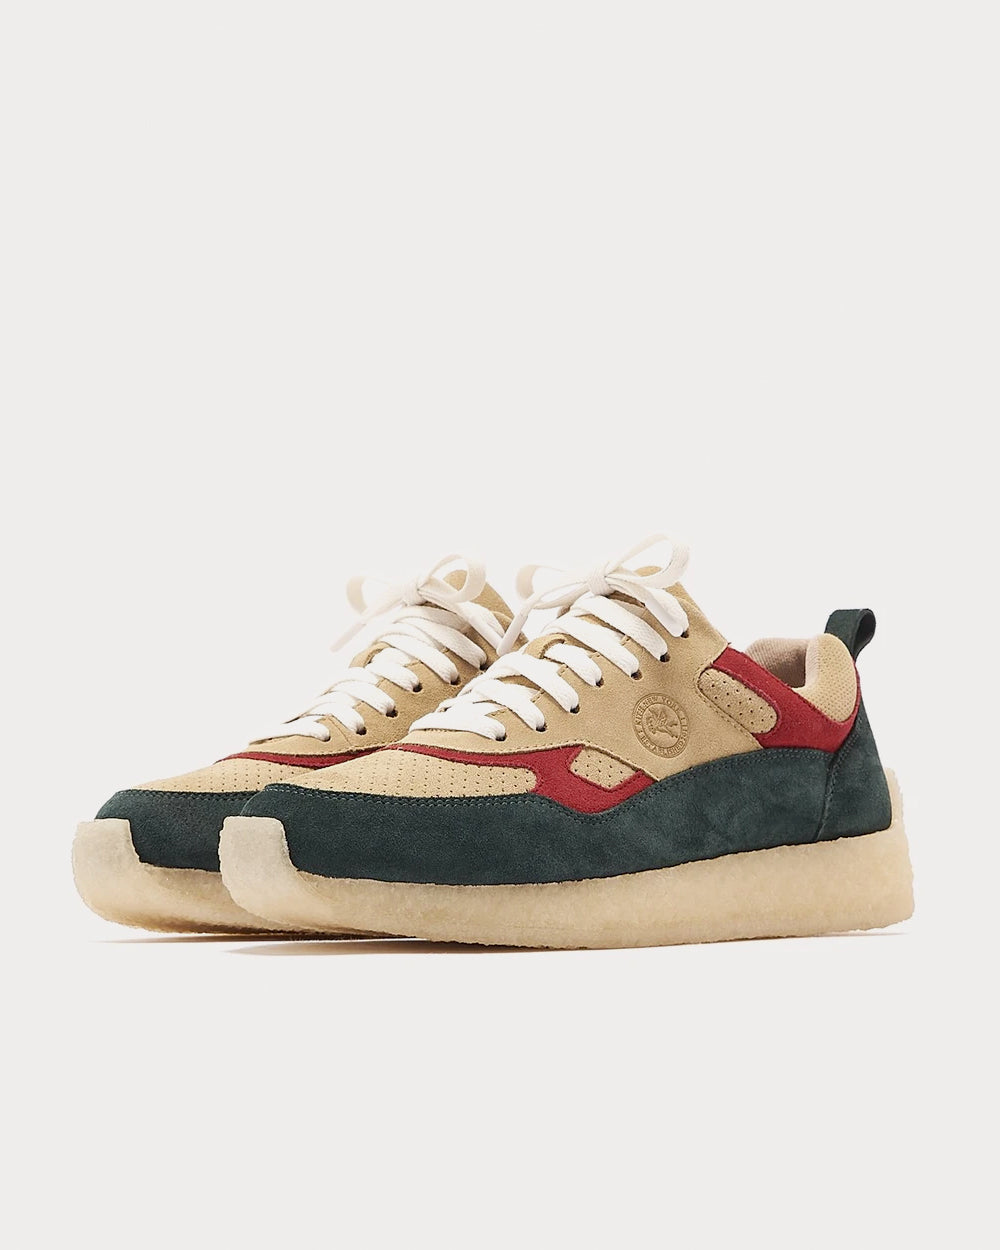 Clarks x Kith - Lockhill Suede Teal Maple Combination Low Top Sneakers